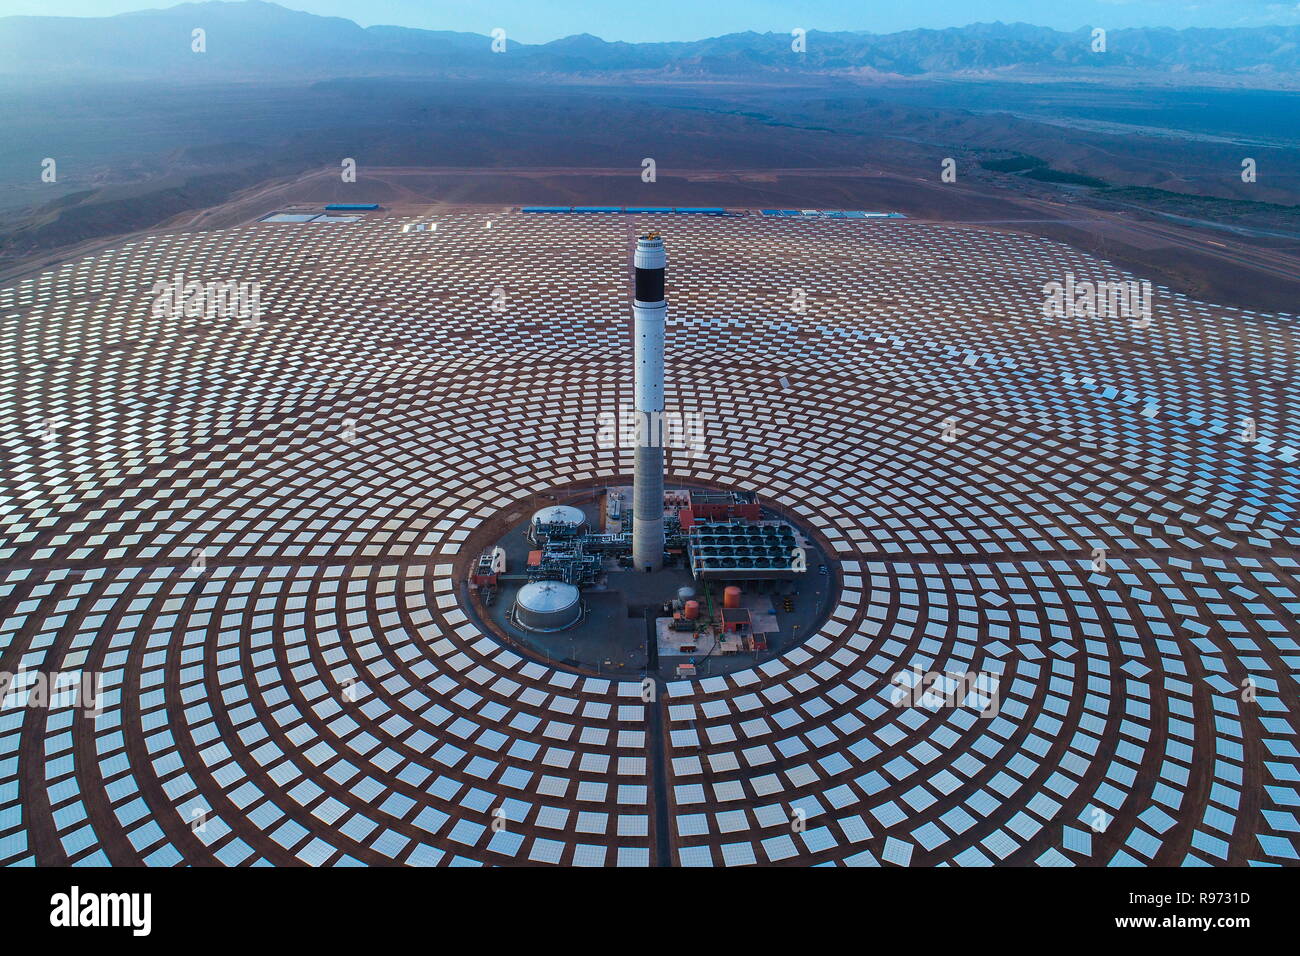 Beijing, Morocco. 7th June, 2018. Photo provided by Shandong Electric Power Construction Co., Ltd (SEPCO III) shows part of Morocco's NOOR III Concentrated Solar Power (CSP) project in Ouarzazate, Morocco, on June 7, 2018. In past years, China and African nations have deepened mutual assistance in development and made concerted efforts in building a closer China-Africa community with a shared future. Credit: SEPCO III/Xinhua/Alamy Live News Stock Photo